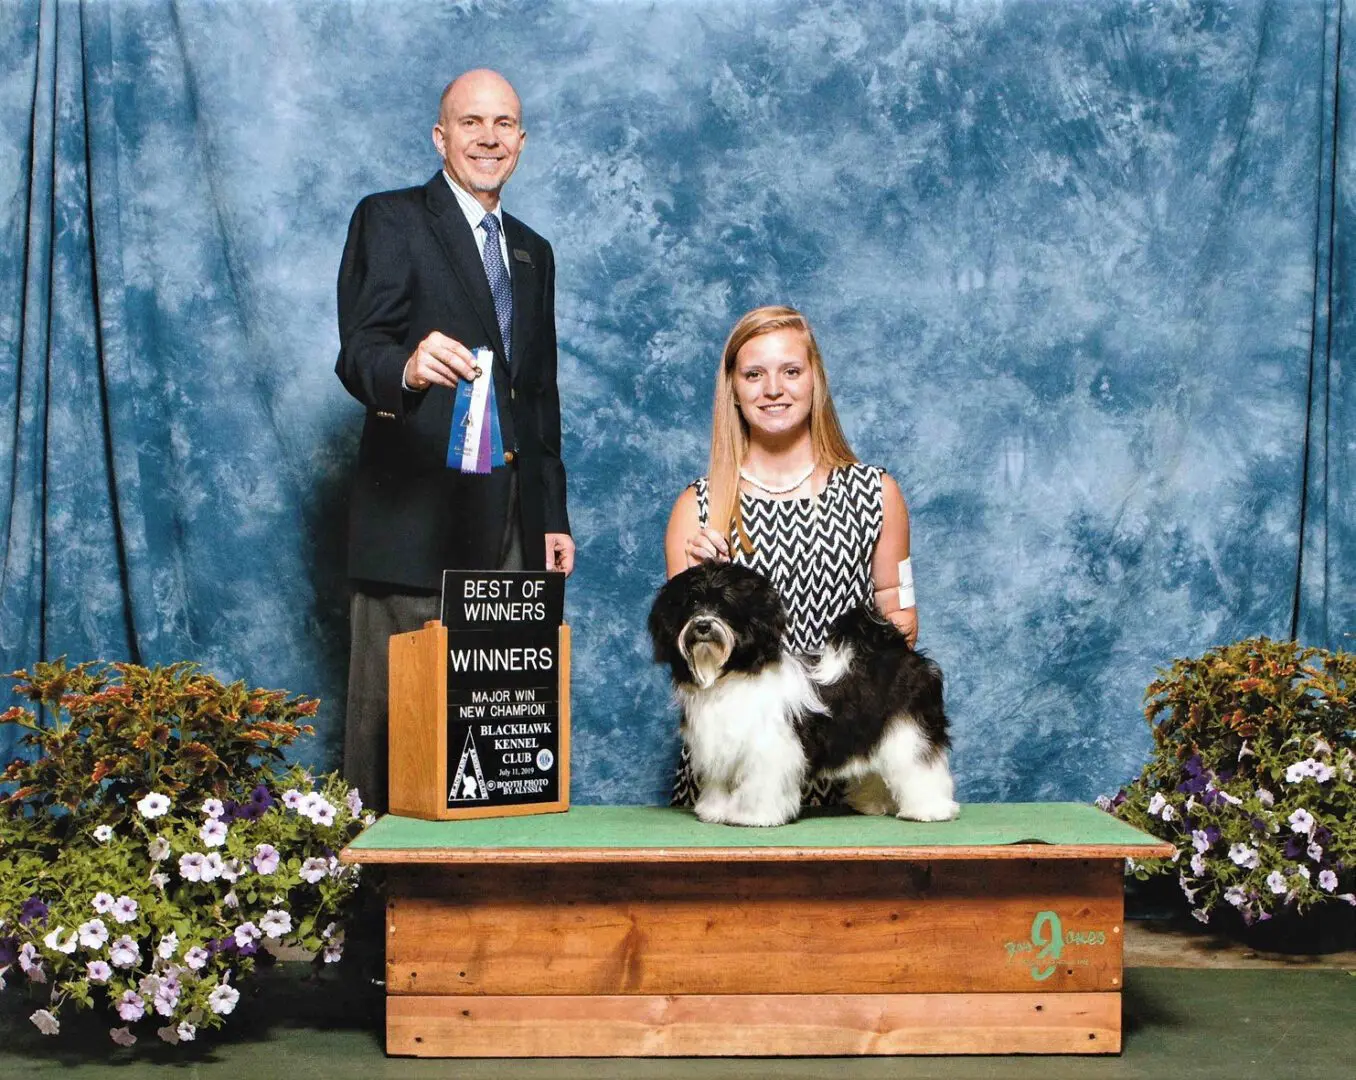 A couple proudly posing with their Havanese dog, an AKC champion, at a dog show in Illinois.